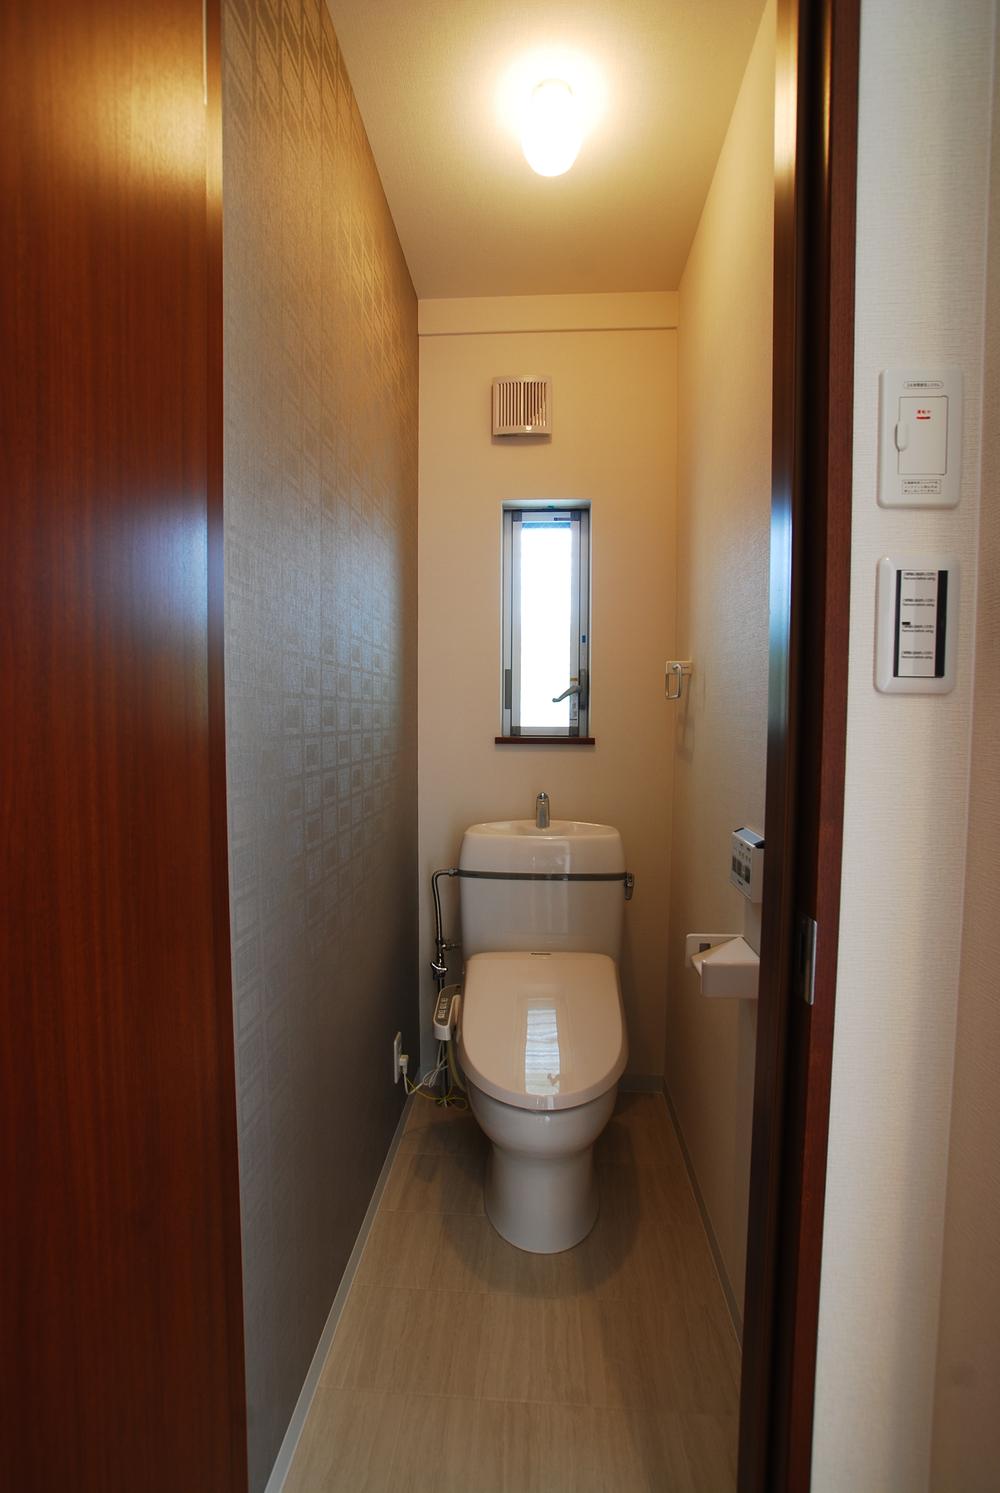 Toilet. Standard equipped with a bidet toilet seat in the room (August 2013) shooting various circles toilet